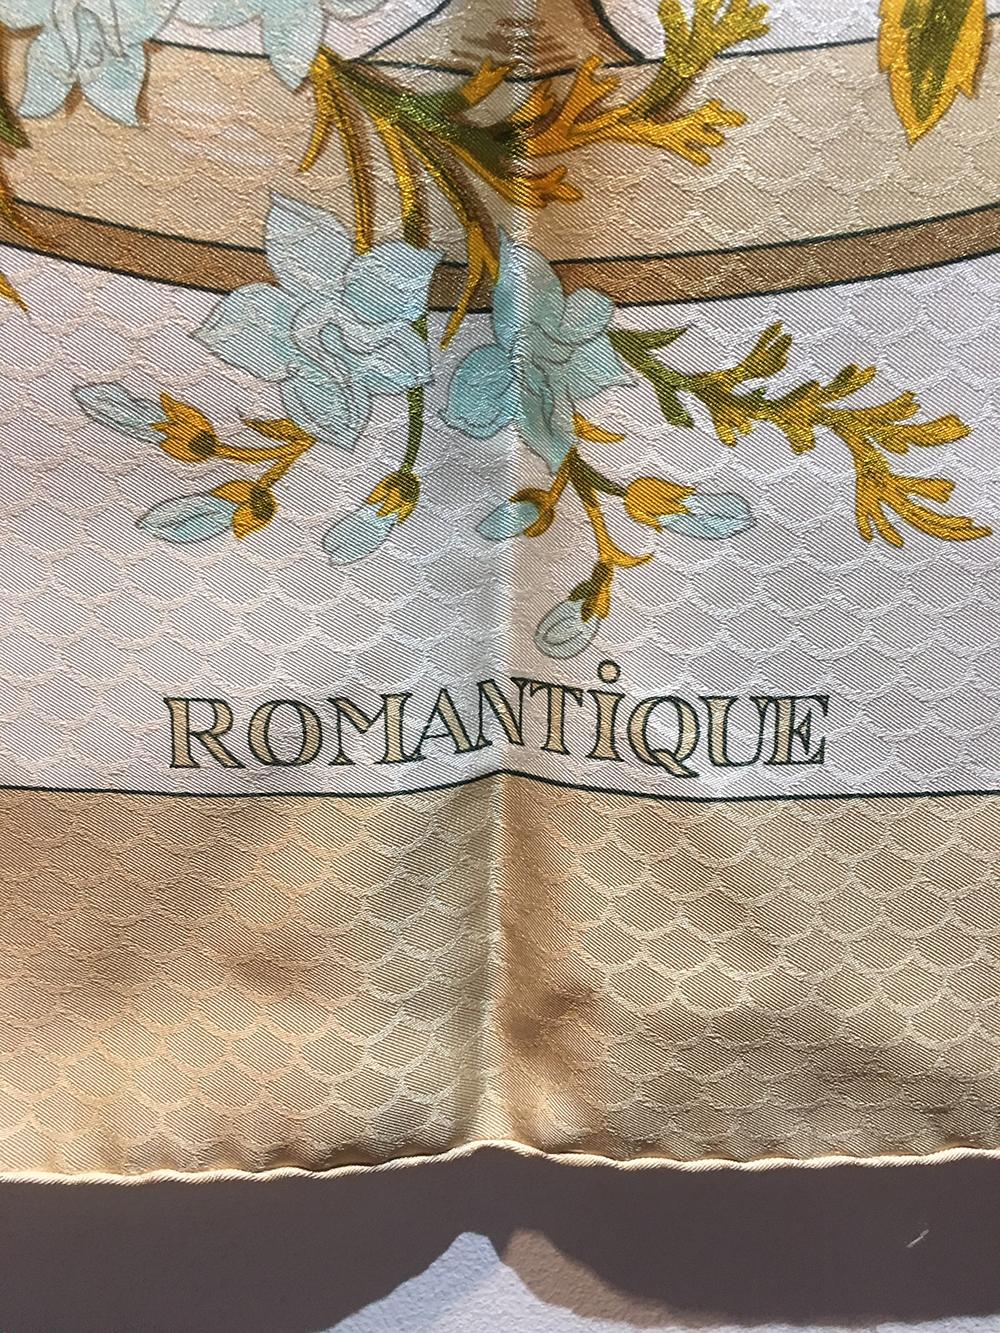 BEAUTIFUL Hermes Vintage Romantique Silk Scarf in beige in excellent condition. Original silk screen design c1973 by Maurice Tranchant features pale yellow, blue and white flowers with green and yellow leaves over a wagon wheel with a white